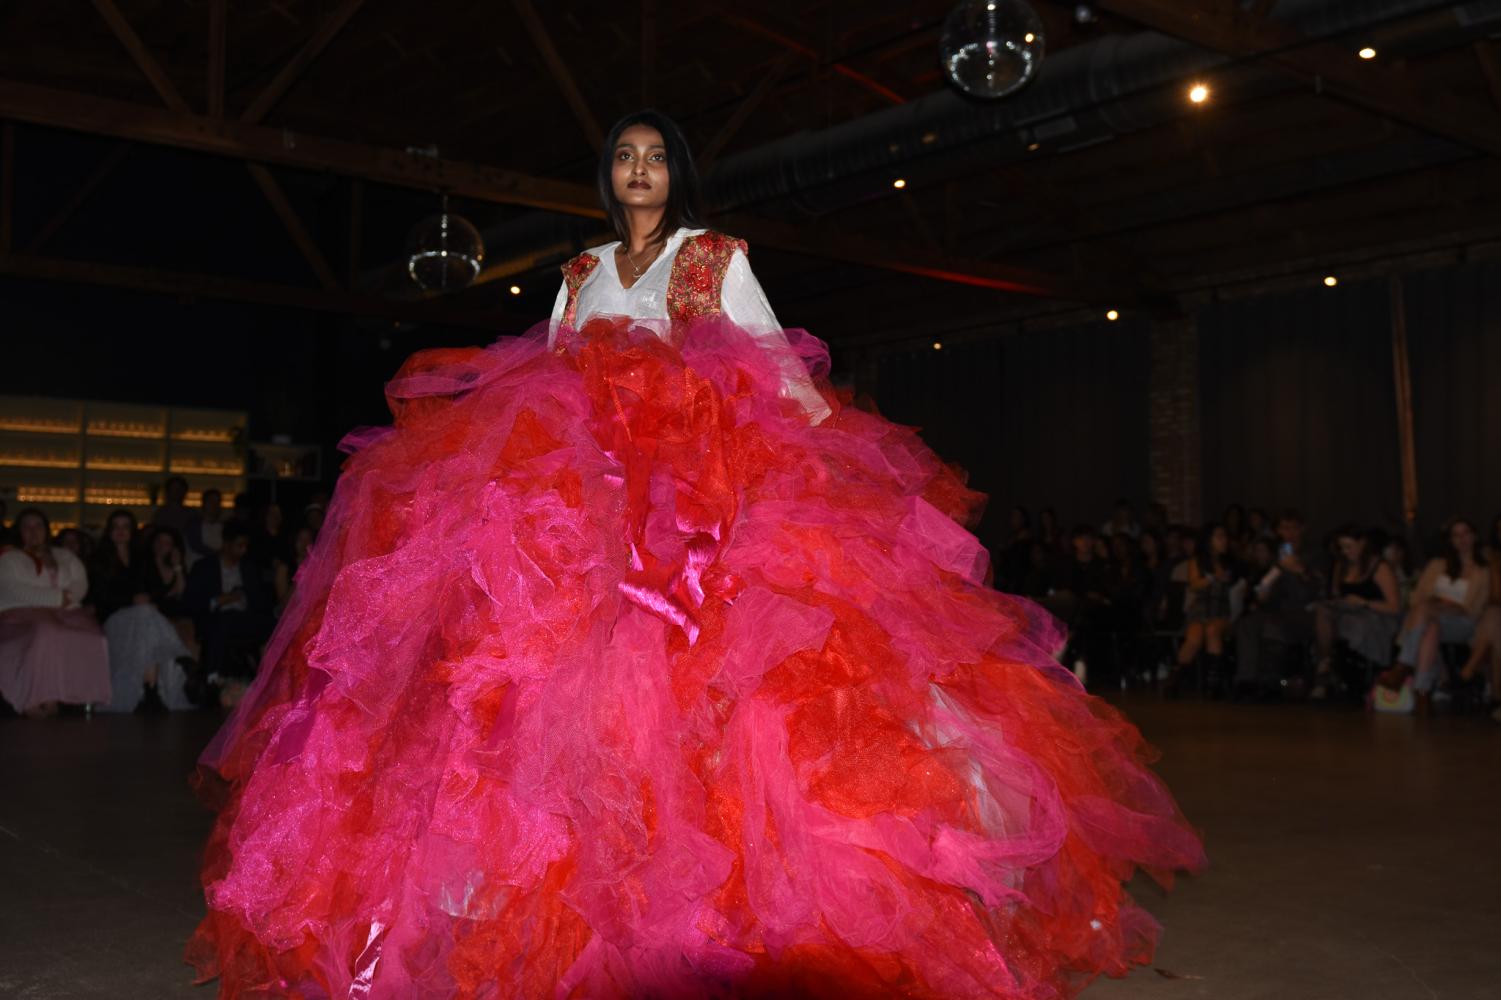 A model wearing a bright pink and red gown walks down a runway.